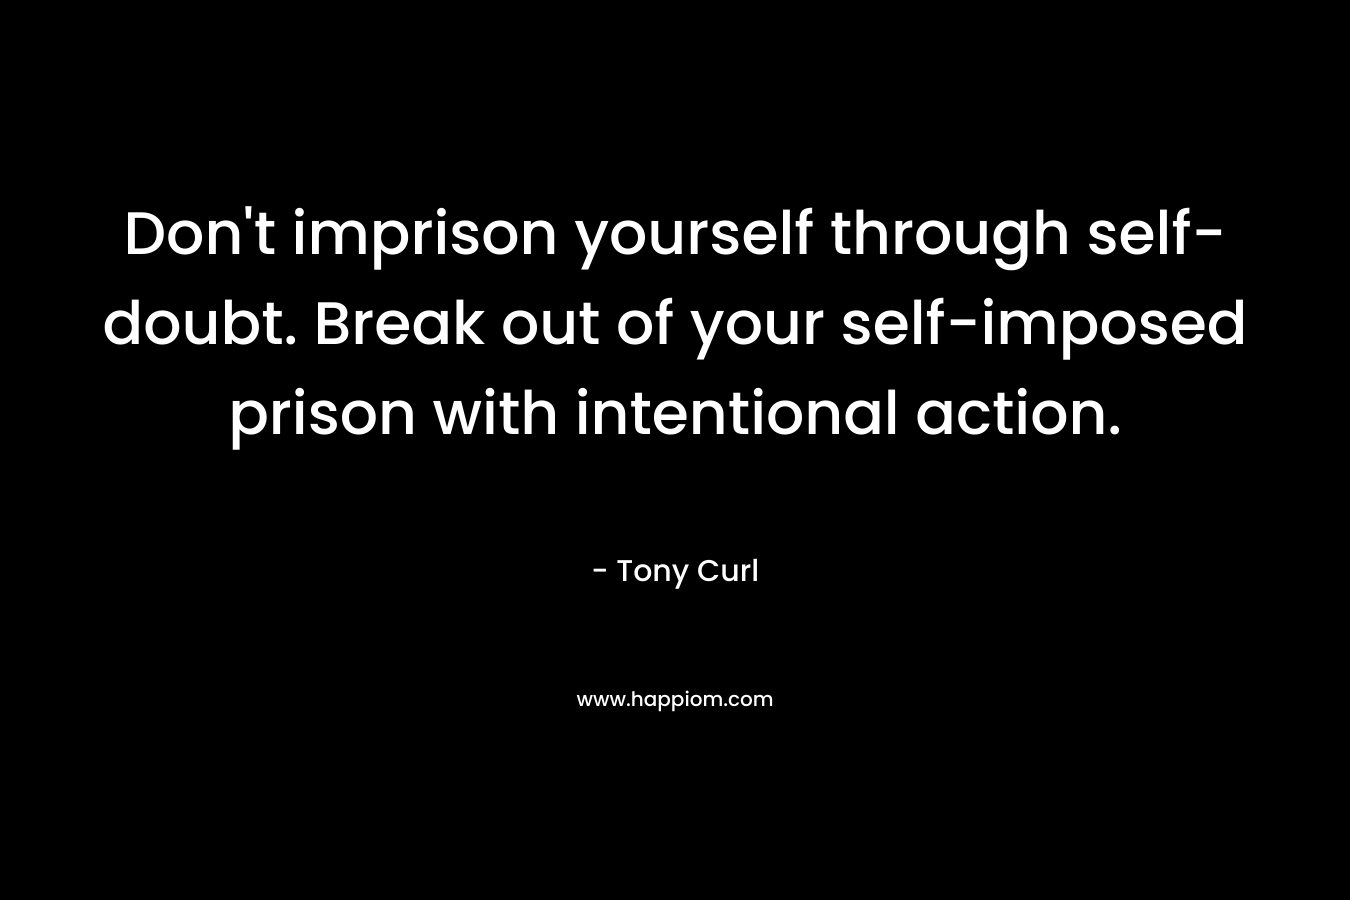 Don’t imprison yourself through self-doubt. Break out of your self-imposed prison with intentional action. – Tony Curl